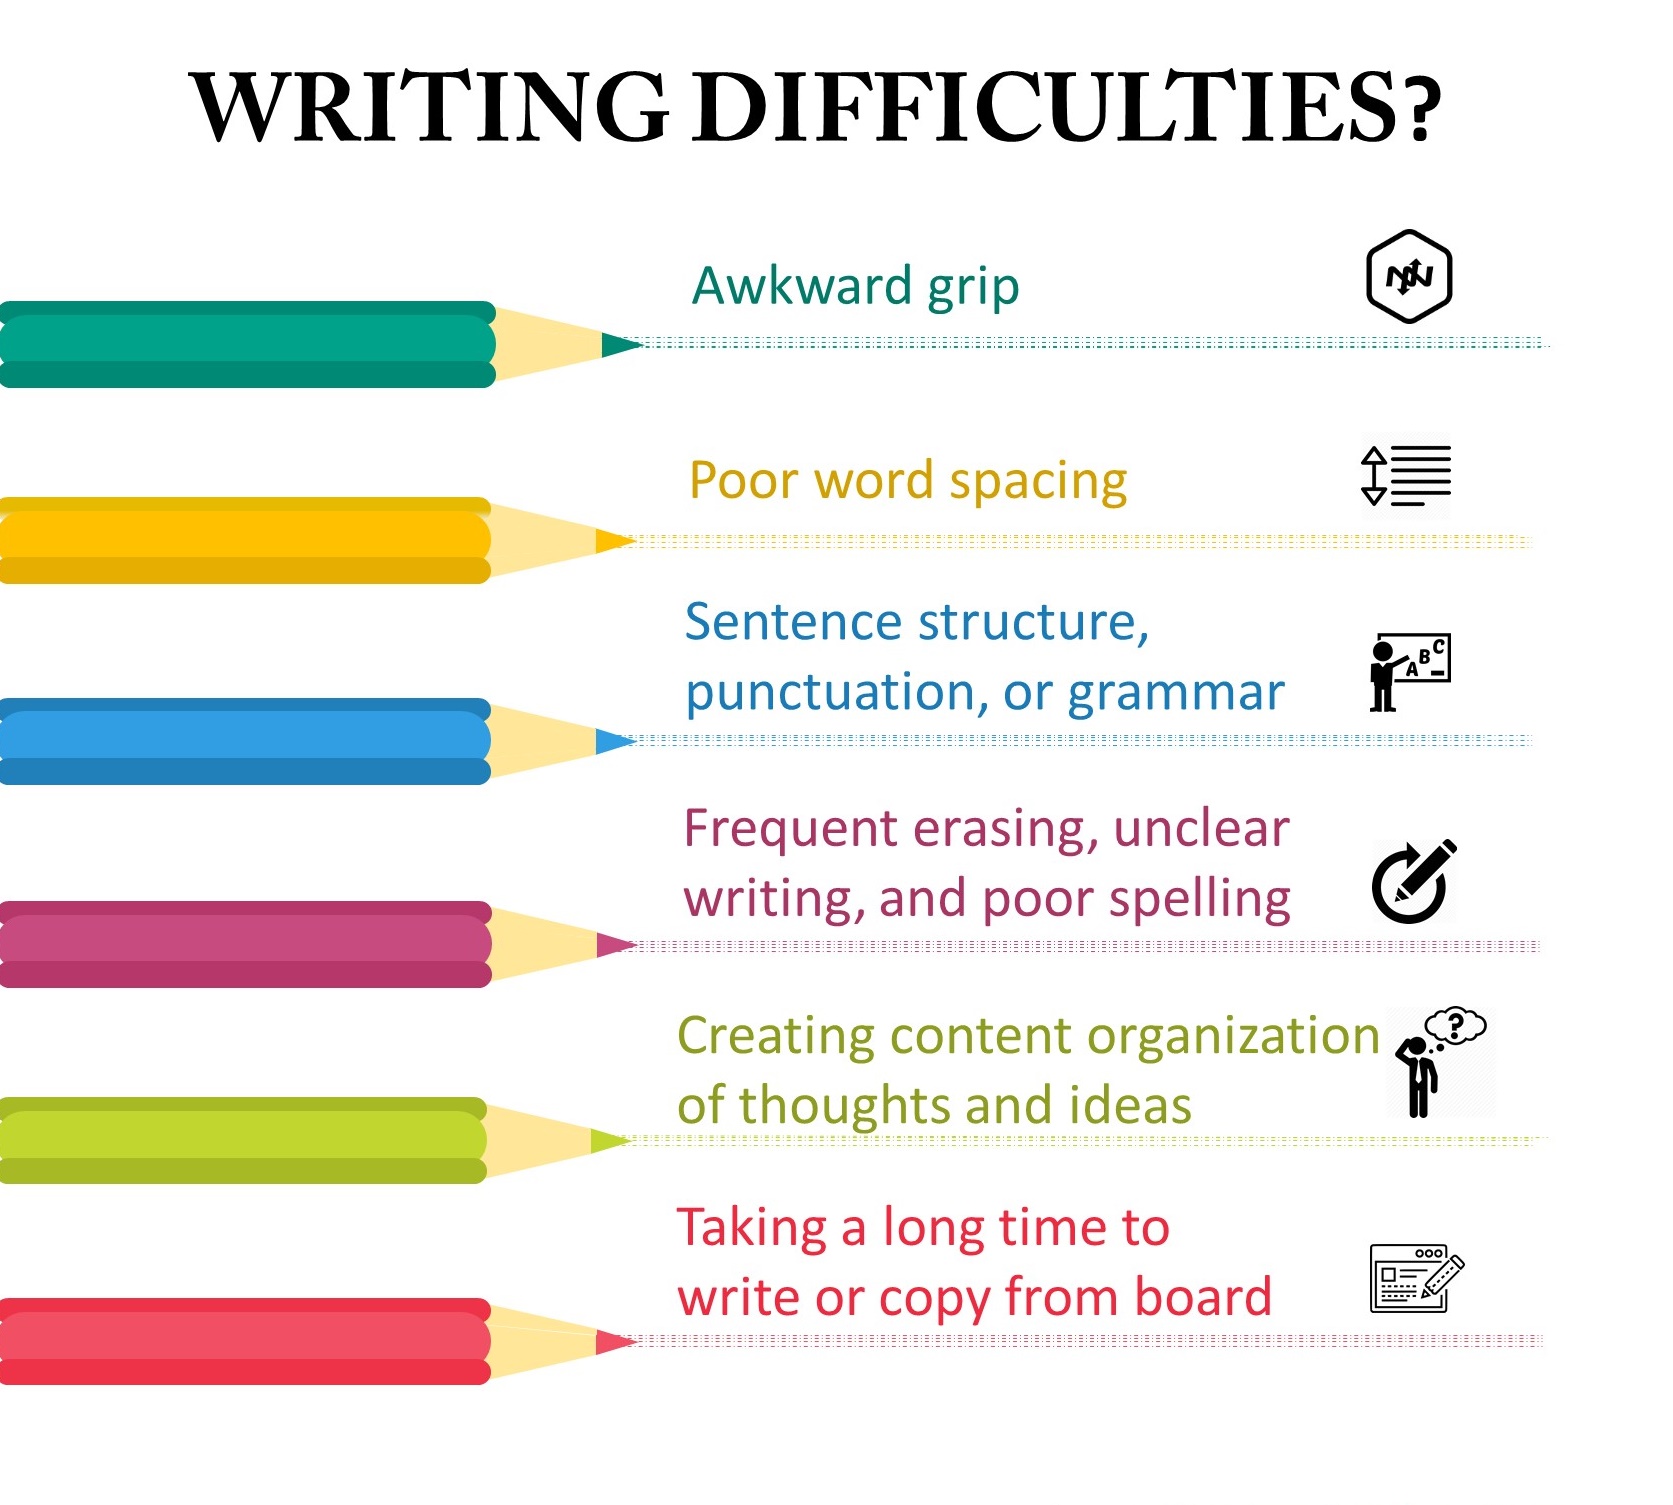 why writing essay is difficult